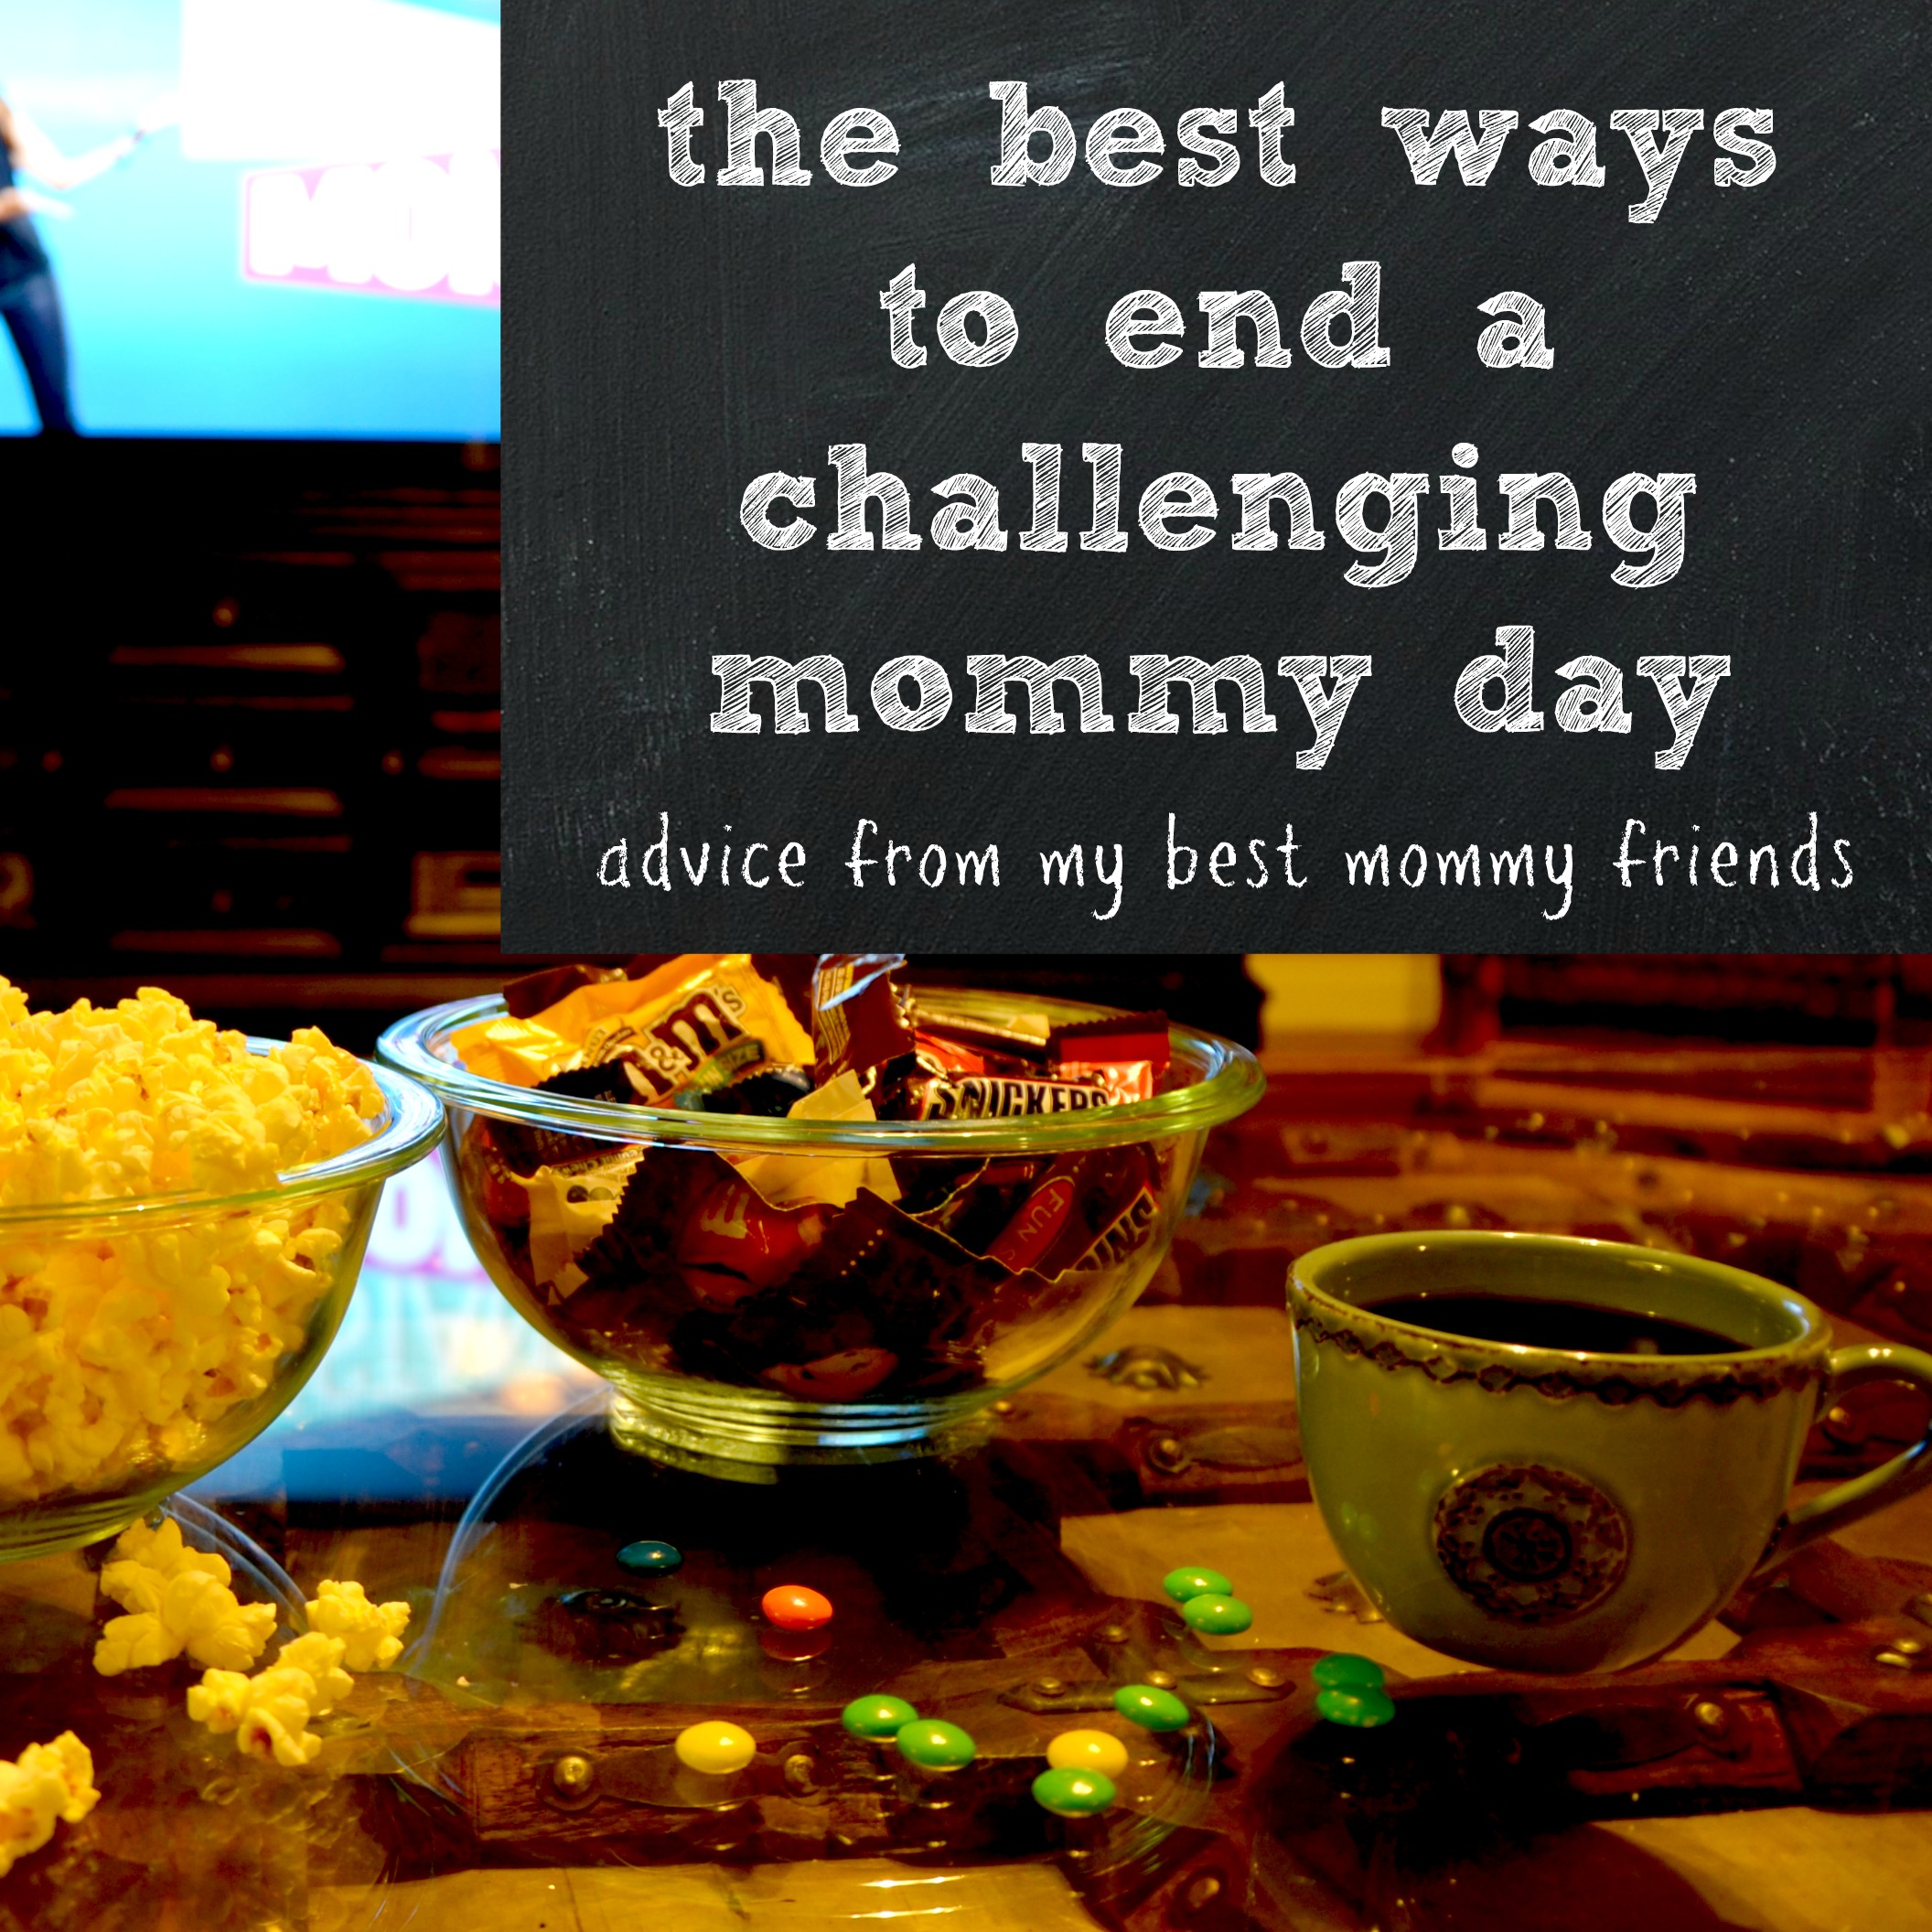 The Best Ways to End a Challenging Mommy Day #Motherfunny #shop #cbias